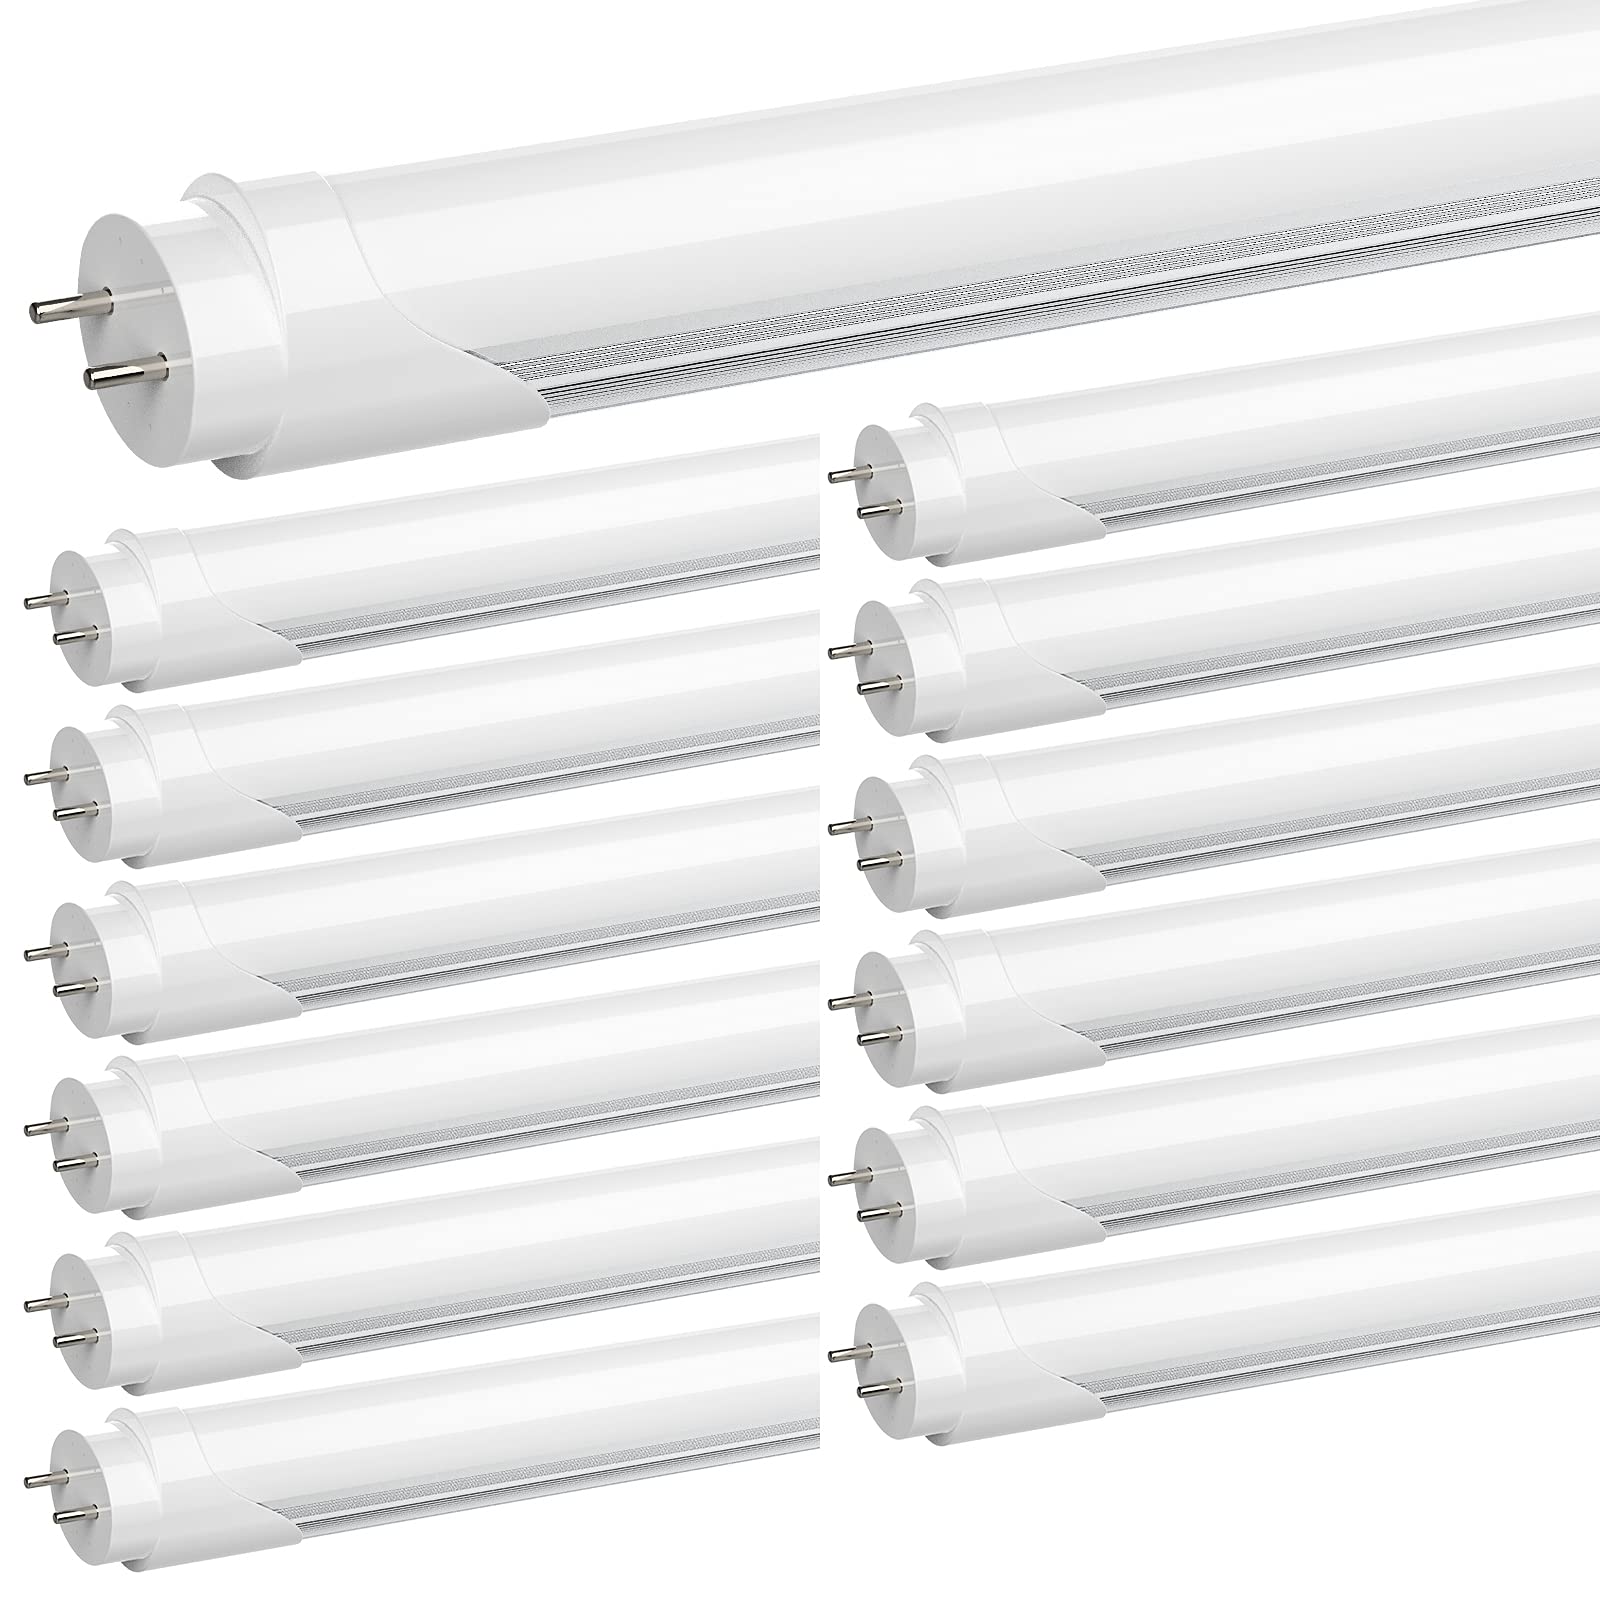 9 Best Led Warm Light Replacement For Fluorescent Tubes 48 Inch 12 Pack ...